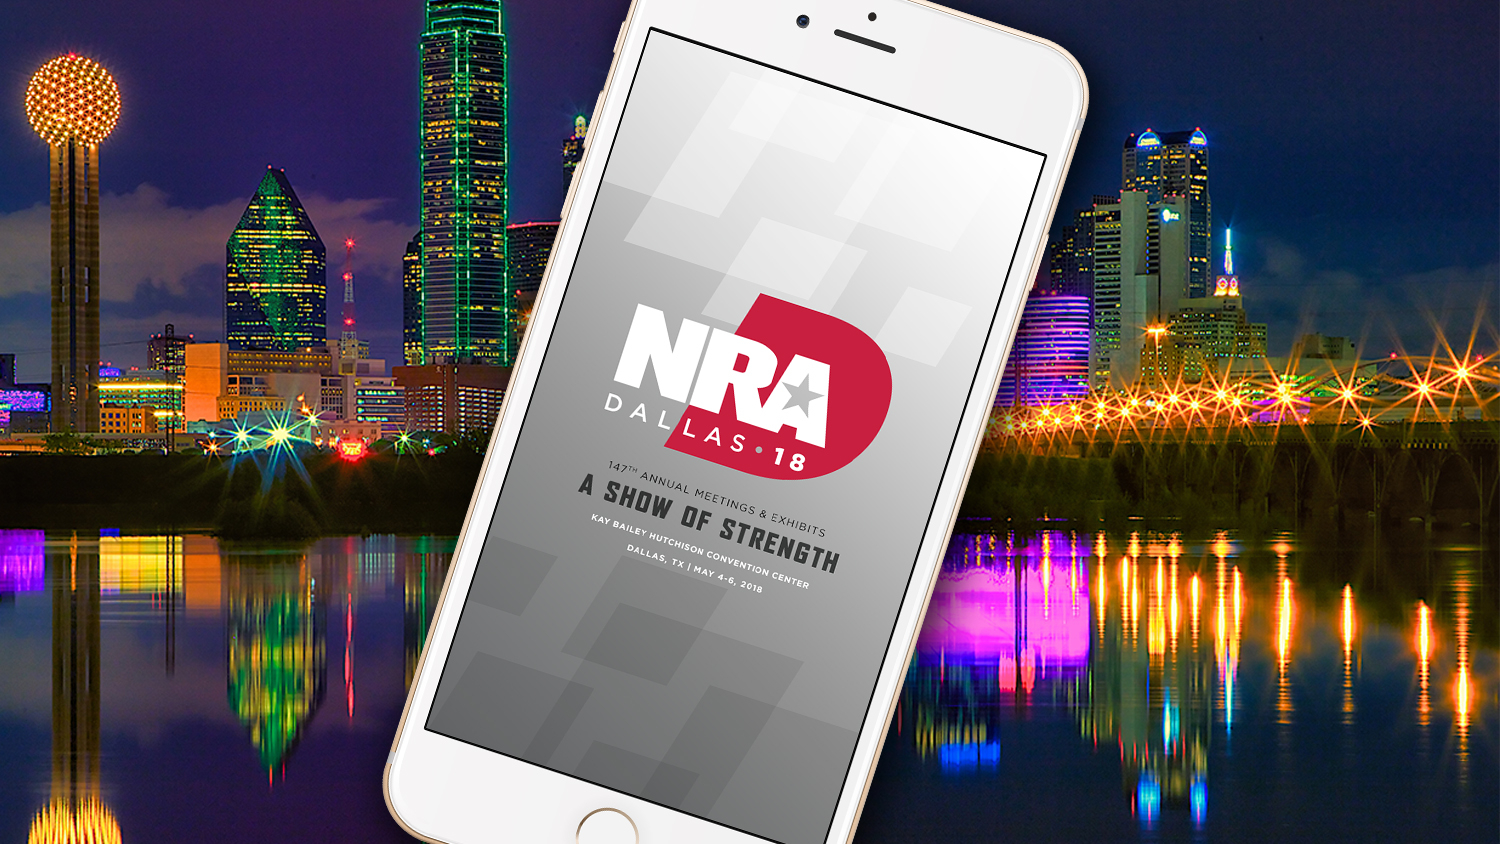 Download the 2018 NRA Annual Meetings & Exhibits Mobile App